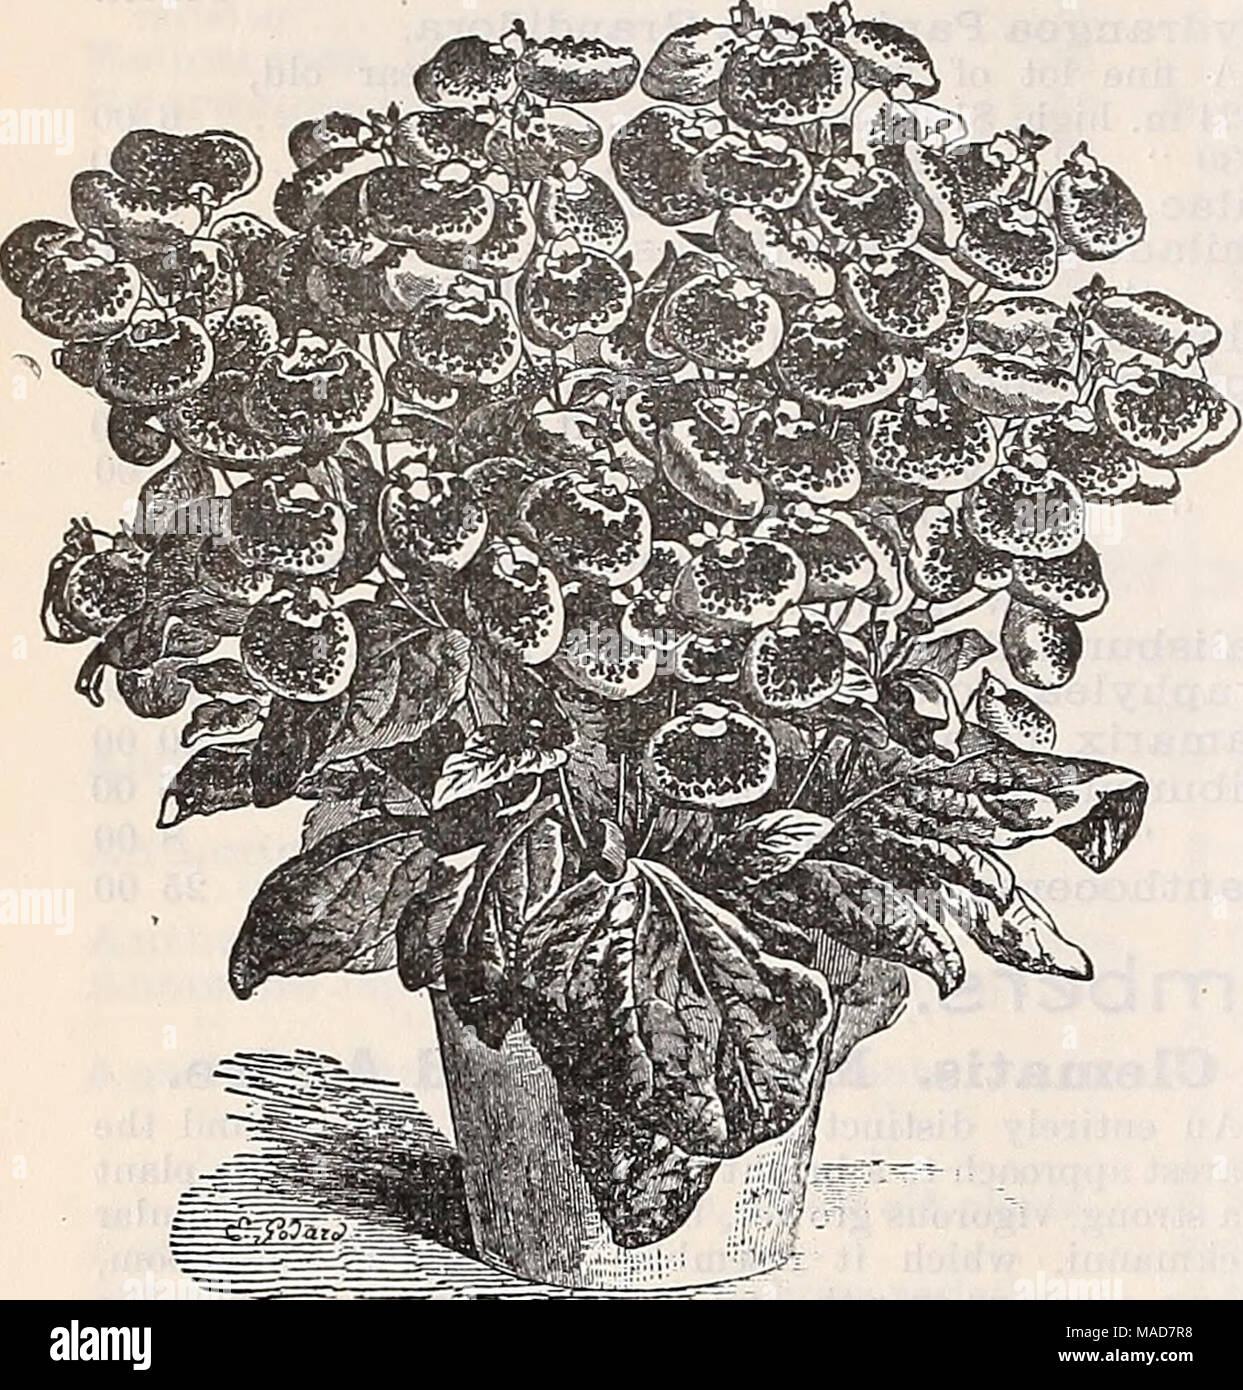 . Dreer's quarterly wholesale price list of bulbs plants vegetable and flower seeds for fall sowing implements, fertilizers and requisites . Calceolaria Grandiflorta Tigrina. Trade Pkt. Per oz. Achillea ptarmica fl. -pi., fine double white hardy border plant 50 $4 00 Alyssum, Little Gem, very dwarf, pure white, very free flowering ... 10 30 &quot; Benthami compactum (Tom Thumb), ivhite, very desirable for pot culture . .per lb. $2.00 10 25 &quot; maritimum, (Sweet Alyssum,) white, per lb. $1.25 10 15 &quot; saxatile compactum, golden yelloiv Imrdy perennial 10 20 Ampelopsis Veitchii (Japan Ivy Stock Photo